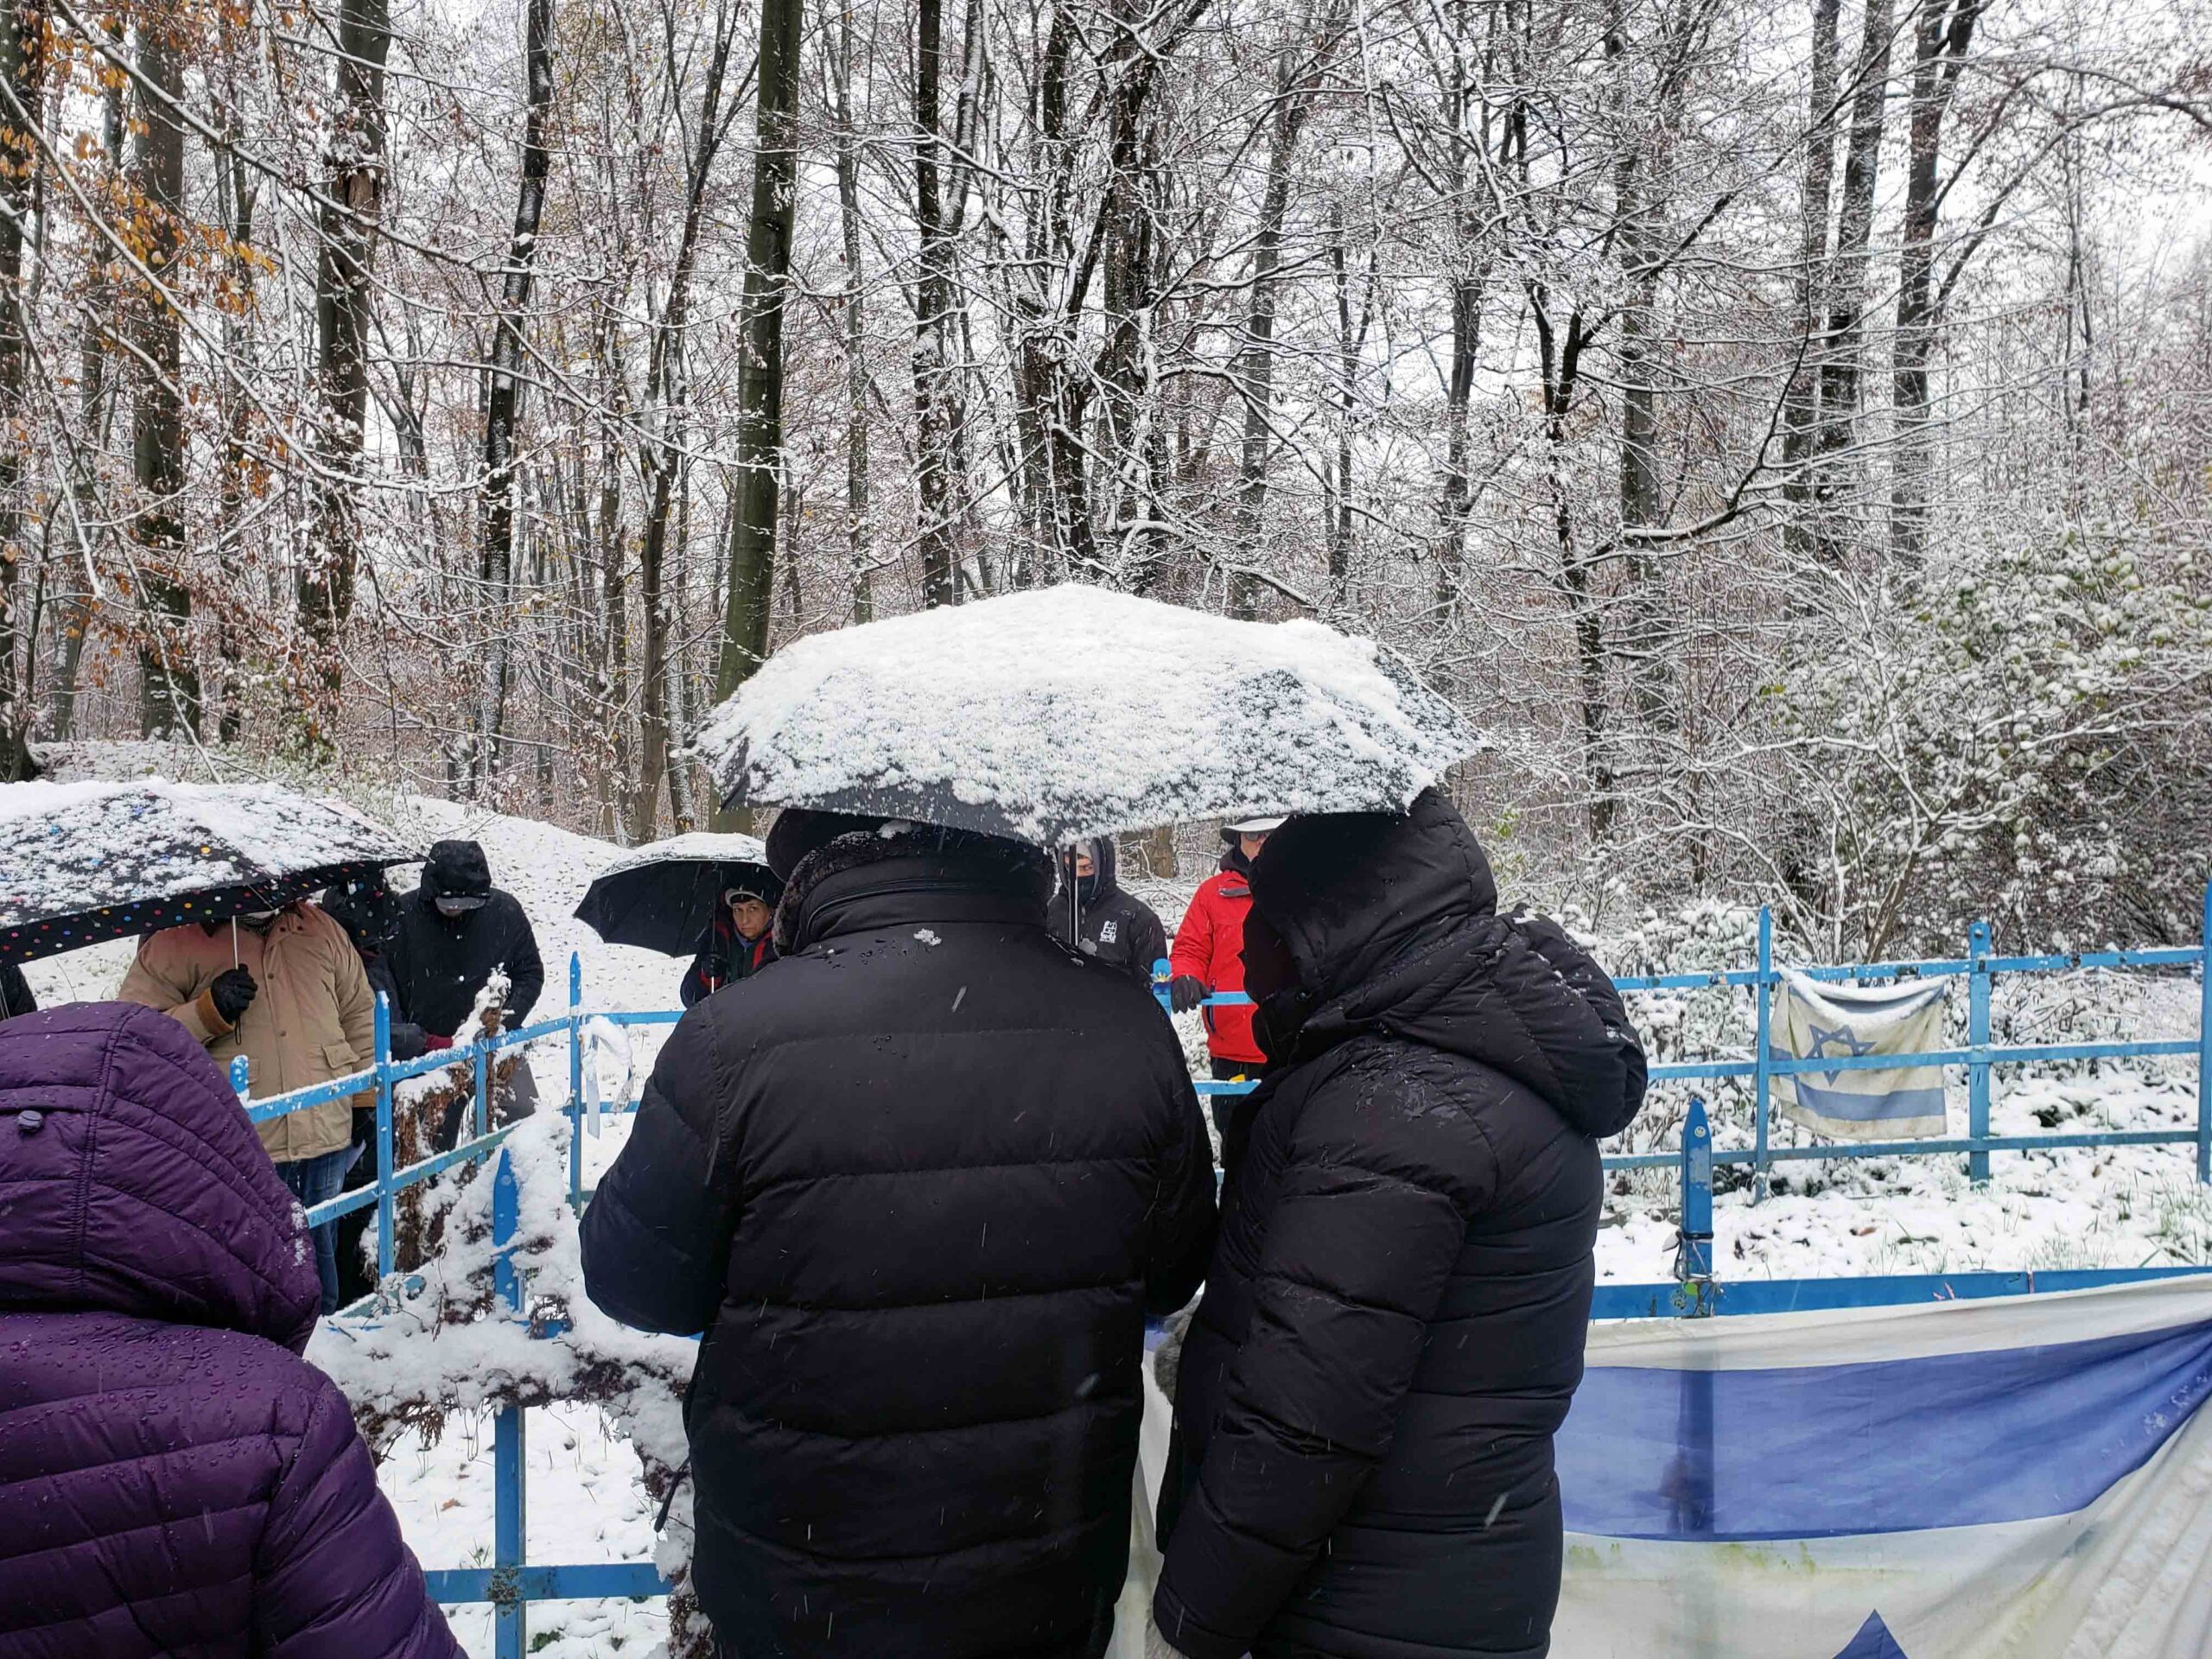 Tour participants gathered around the fence of a mass grave in a snowy forest